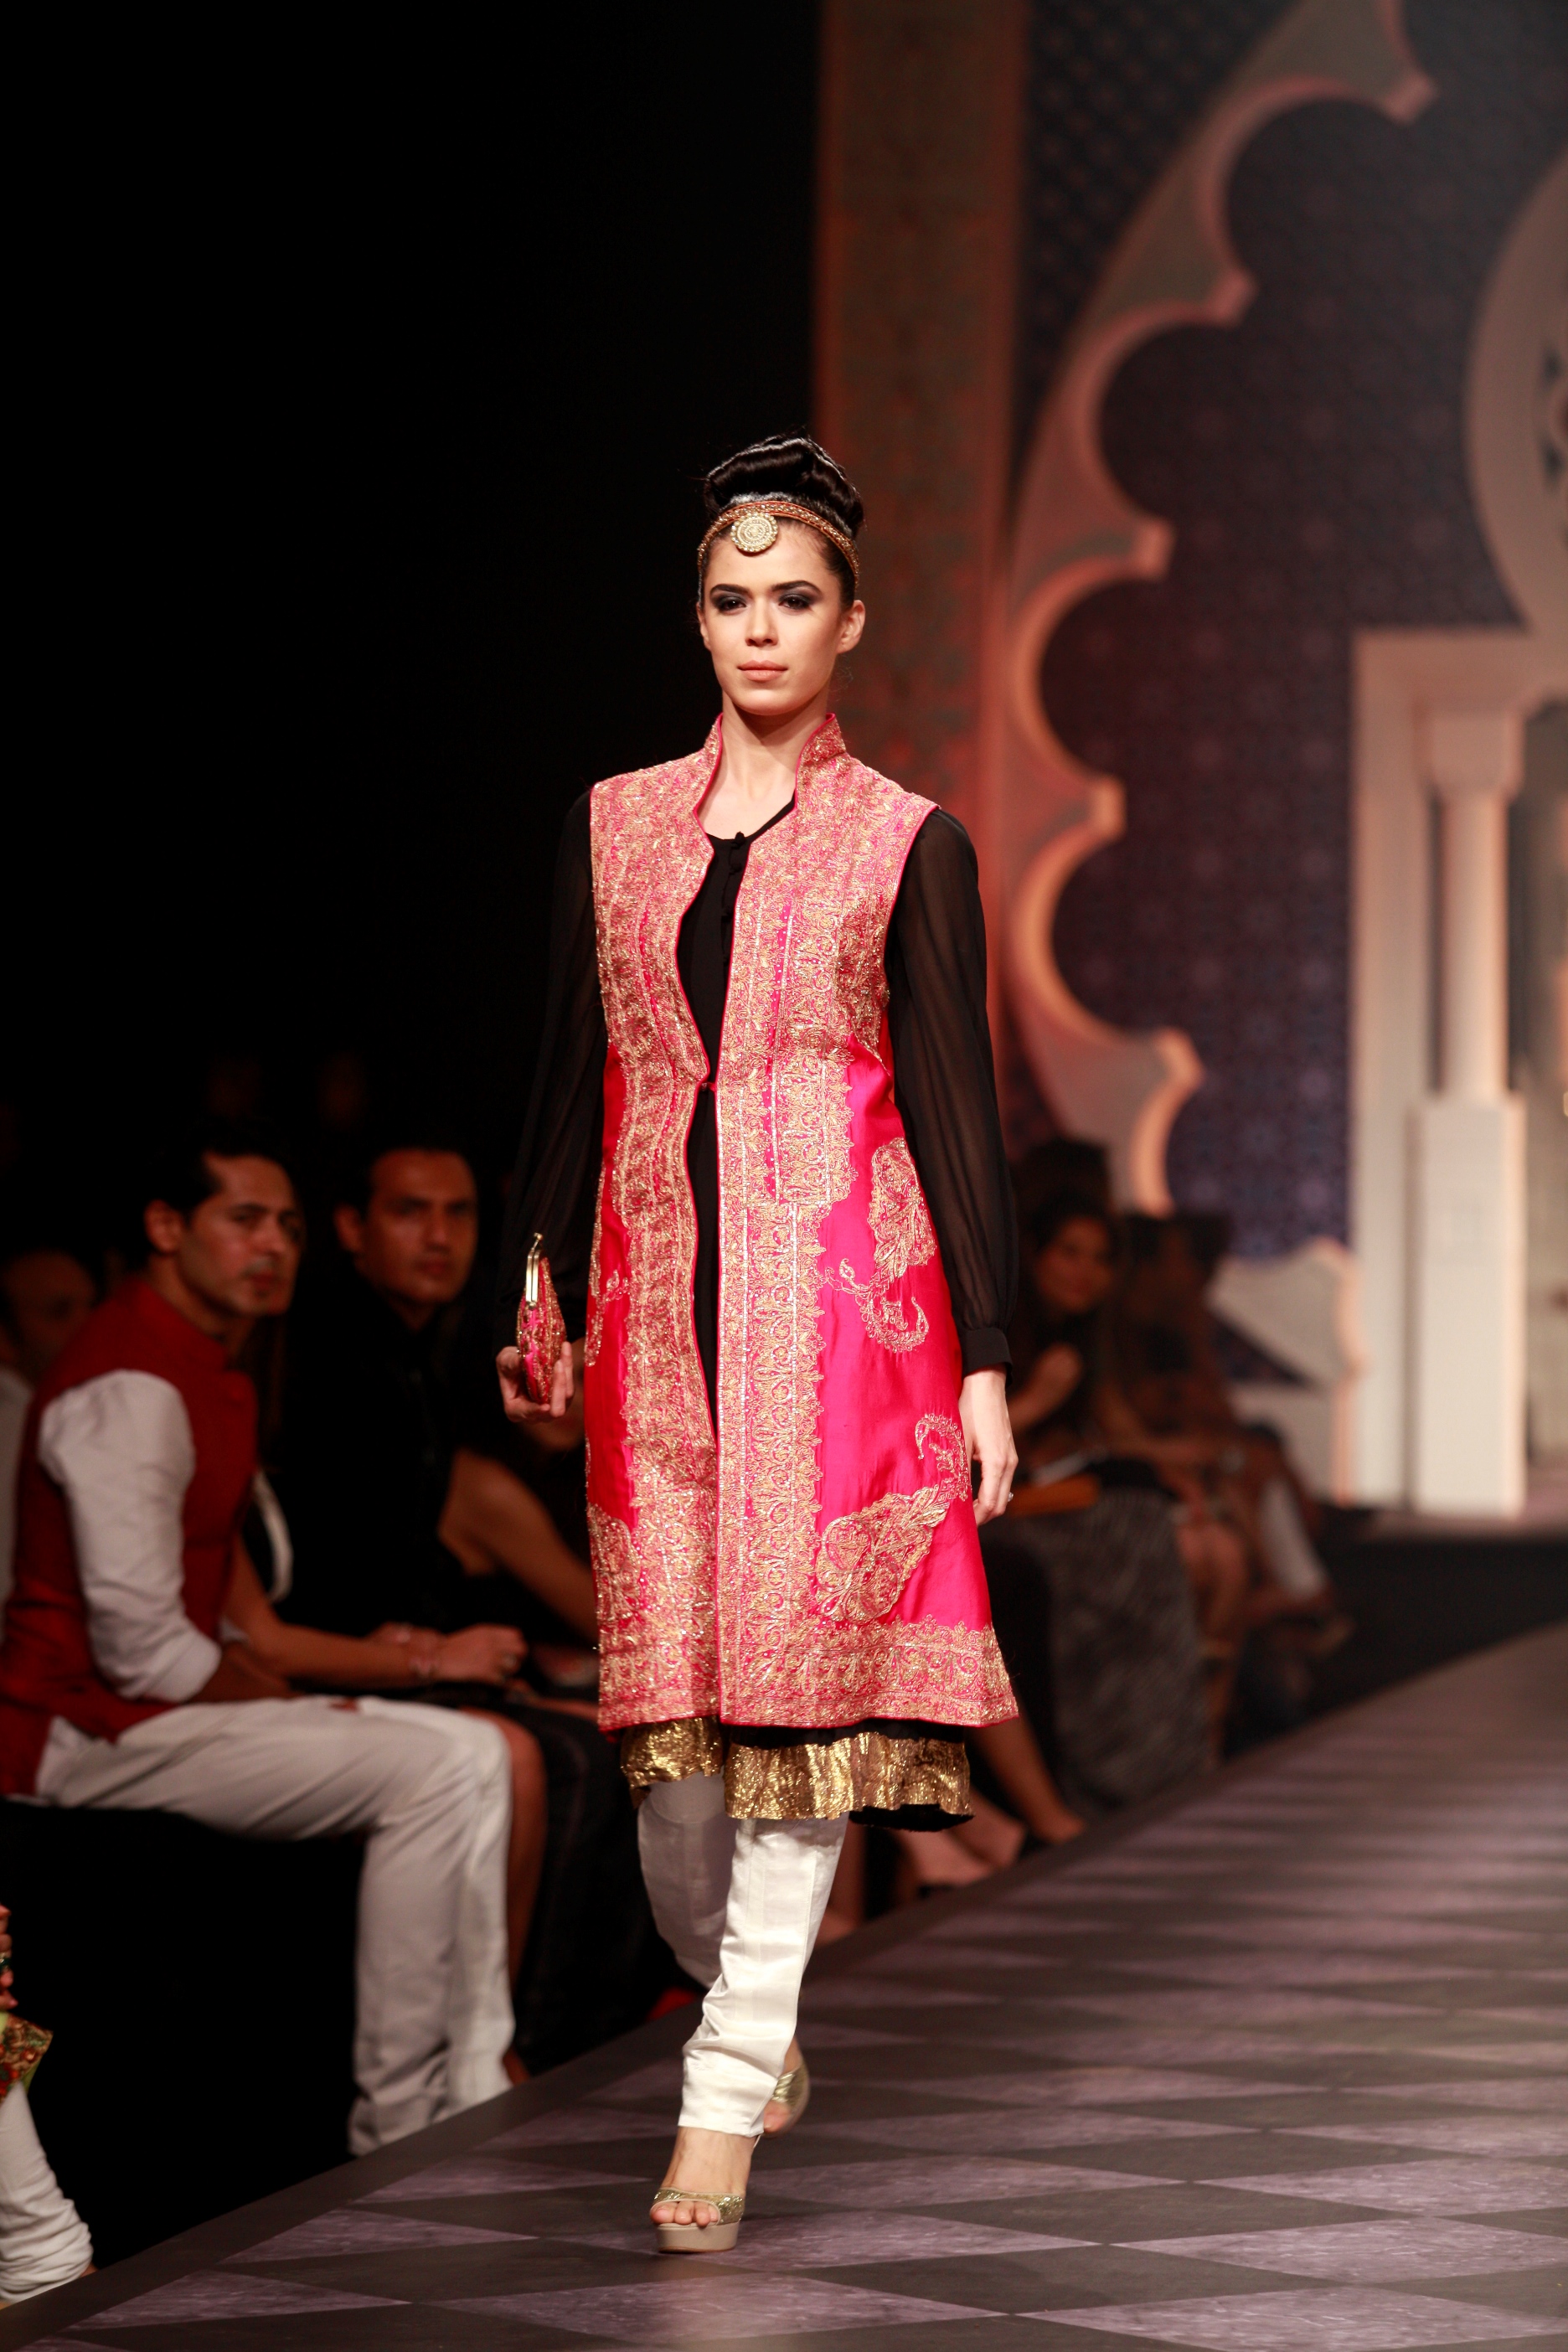 Seen at Aamby Valley India Bridal Fashion Week - Day 3-Model in a Raghavendra Rathore creation